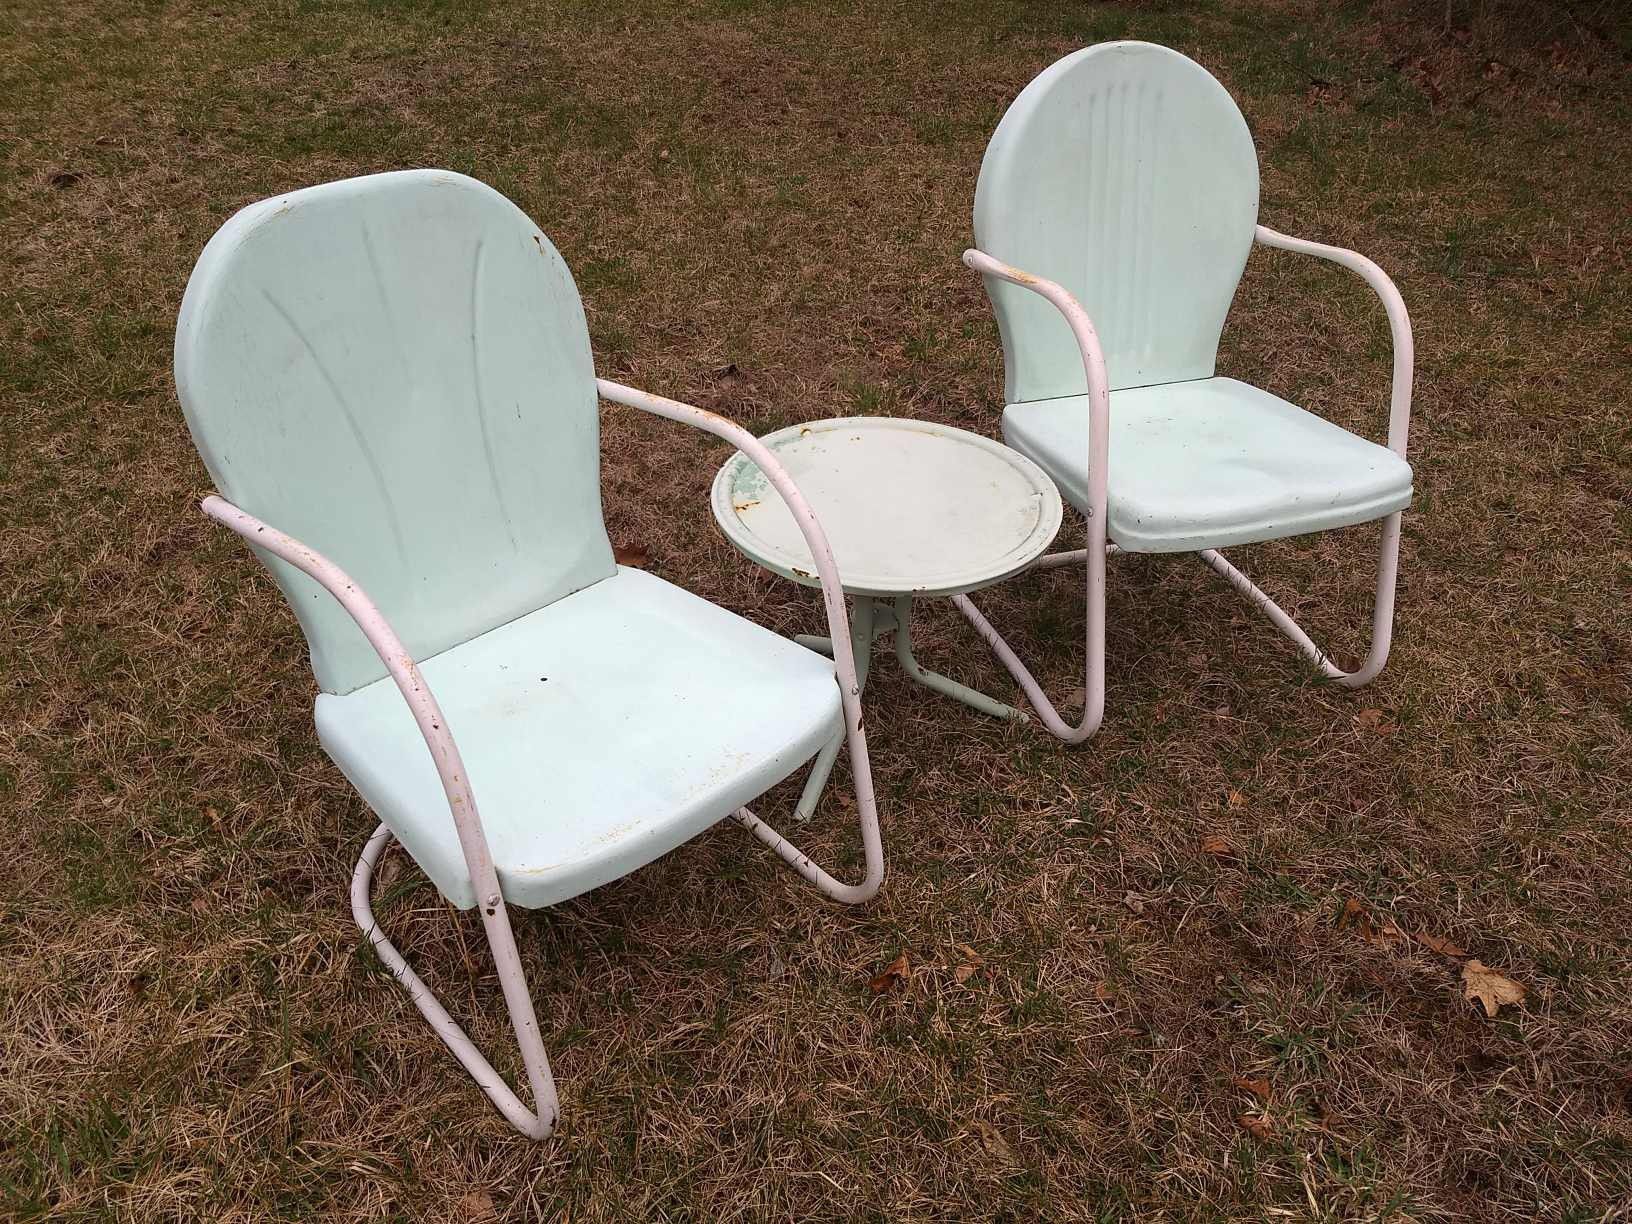 Metal lawn chairs